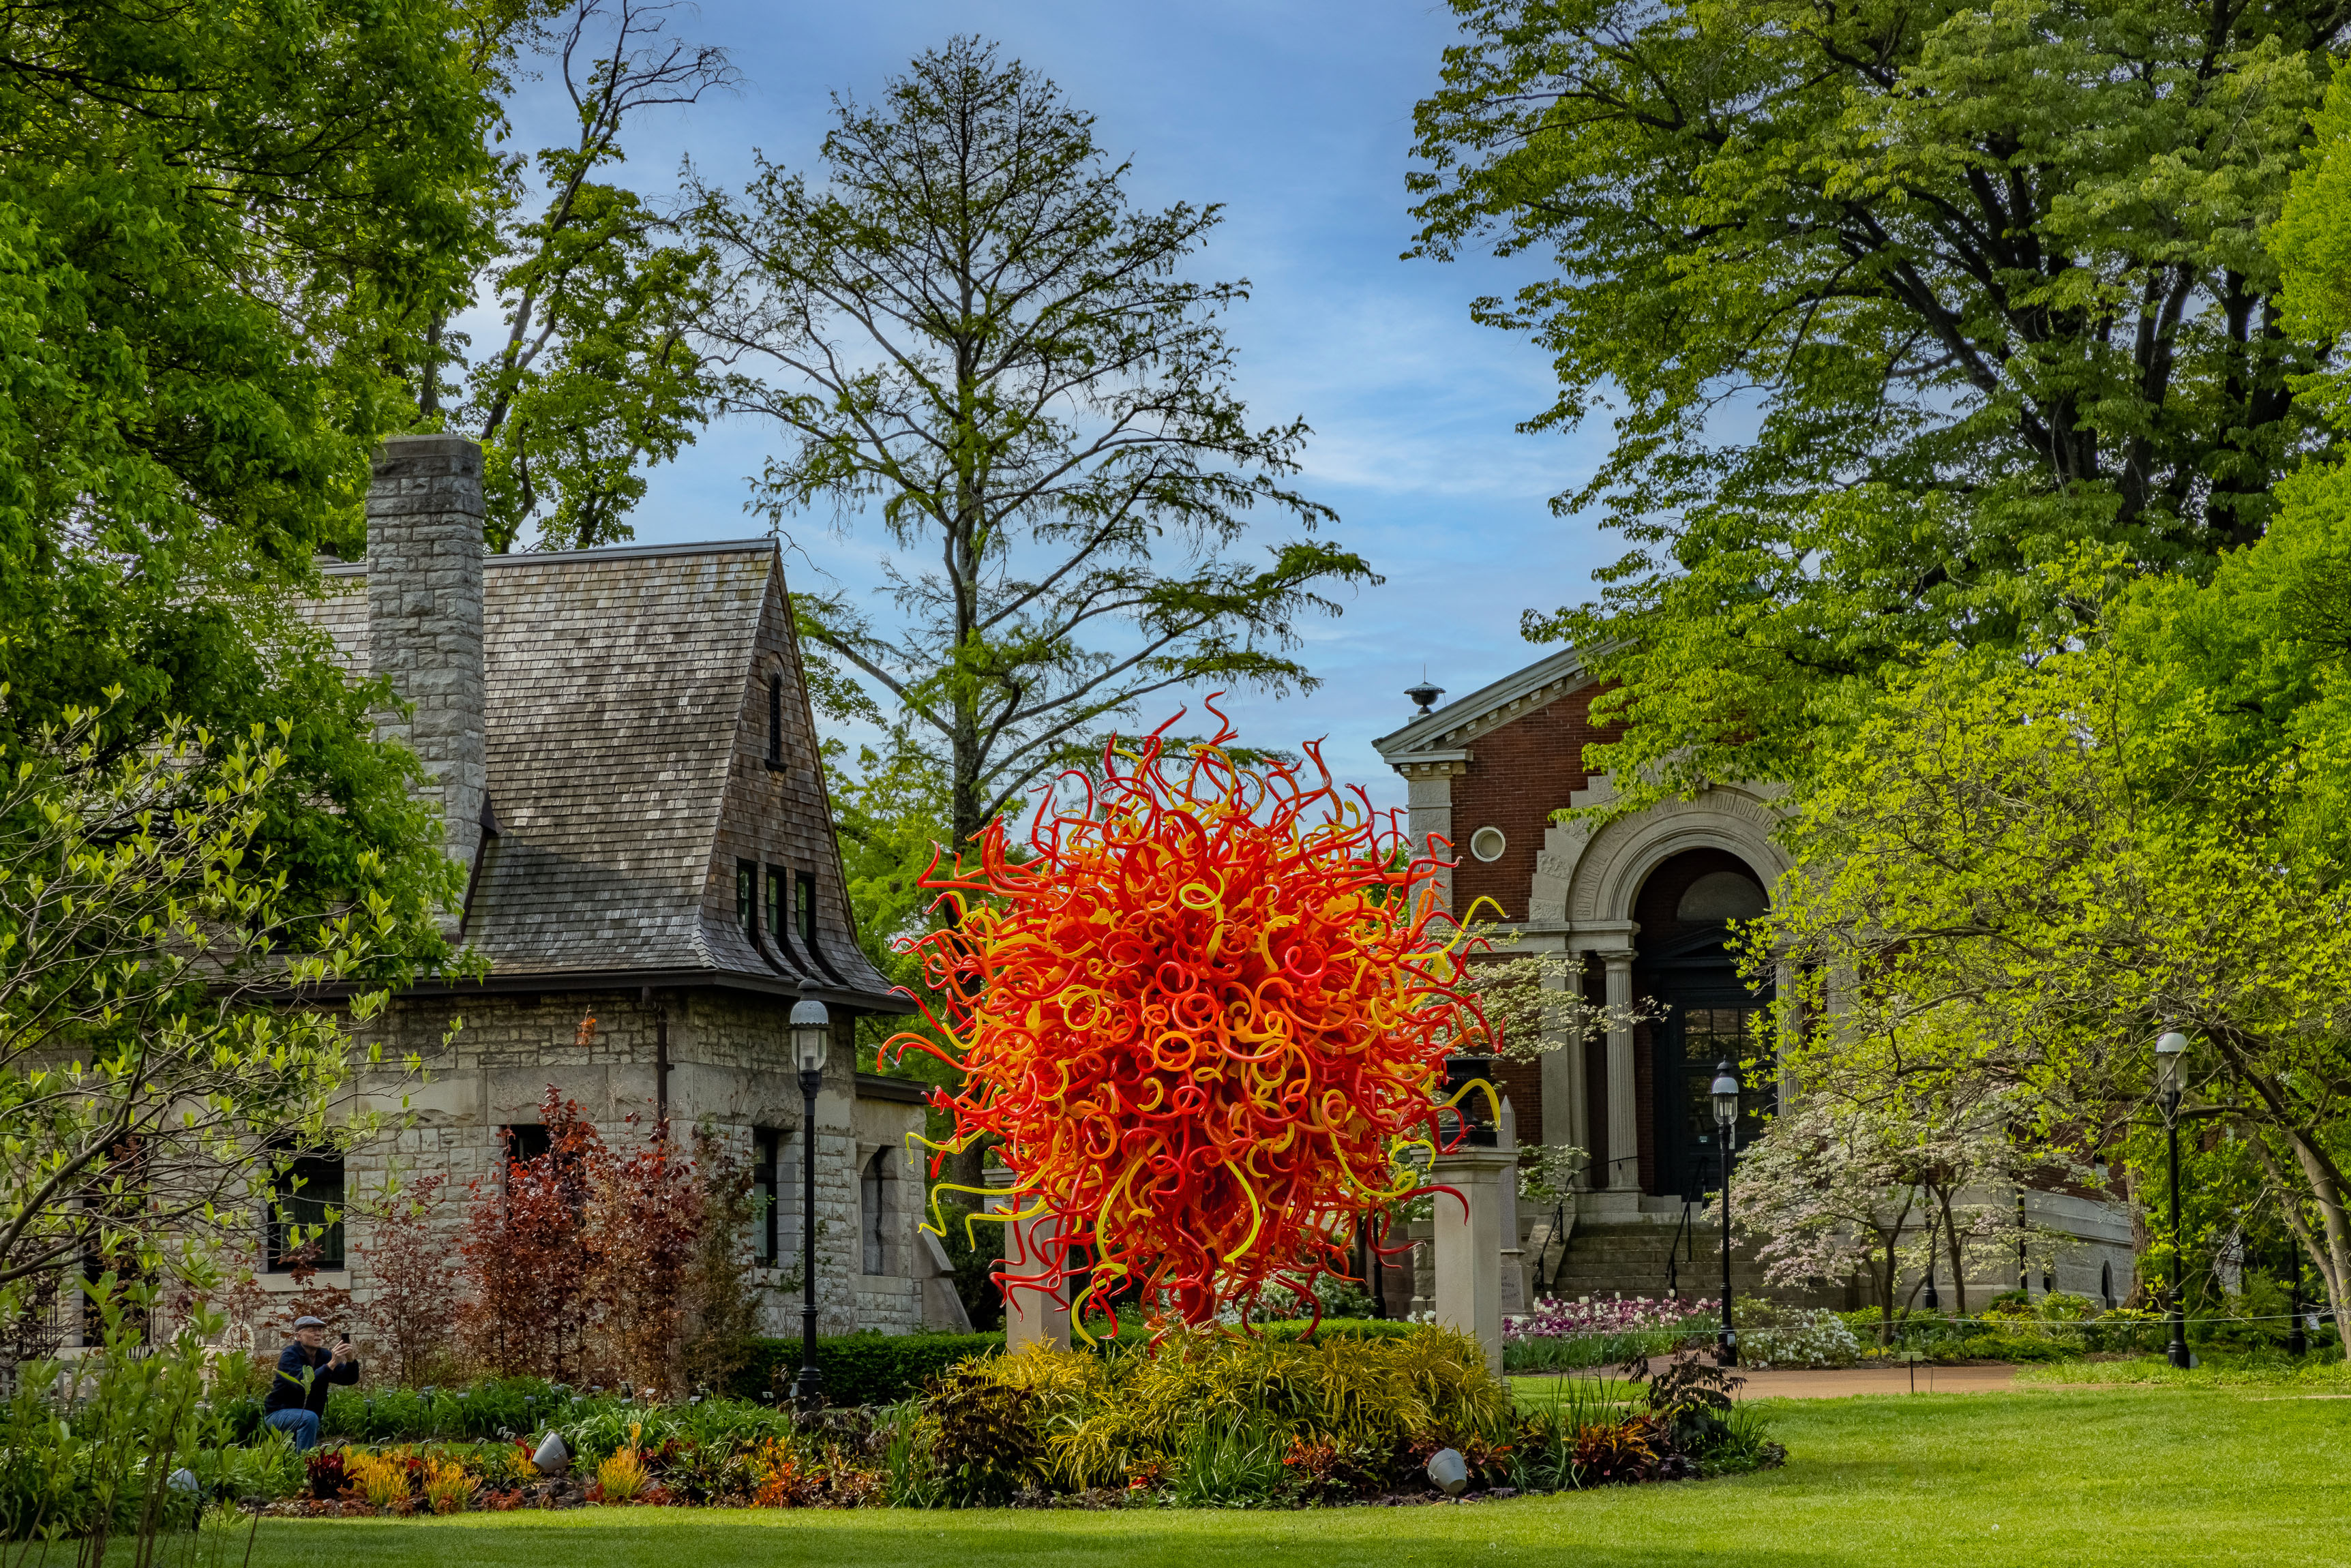 Chihuly - orange and red venetian glass sculpture in a garden next to a stone house